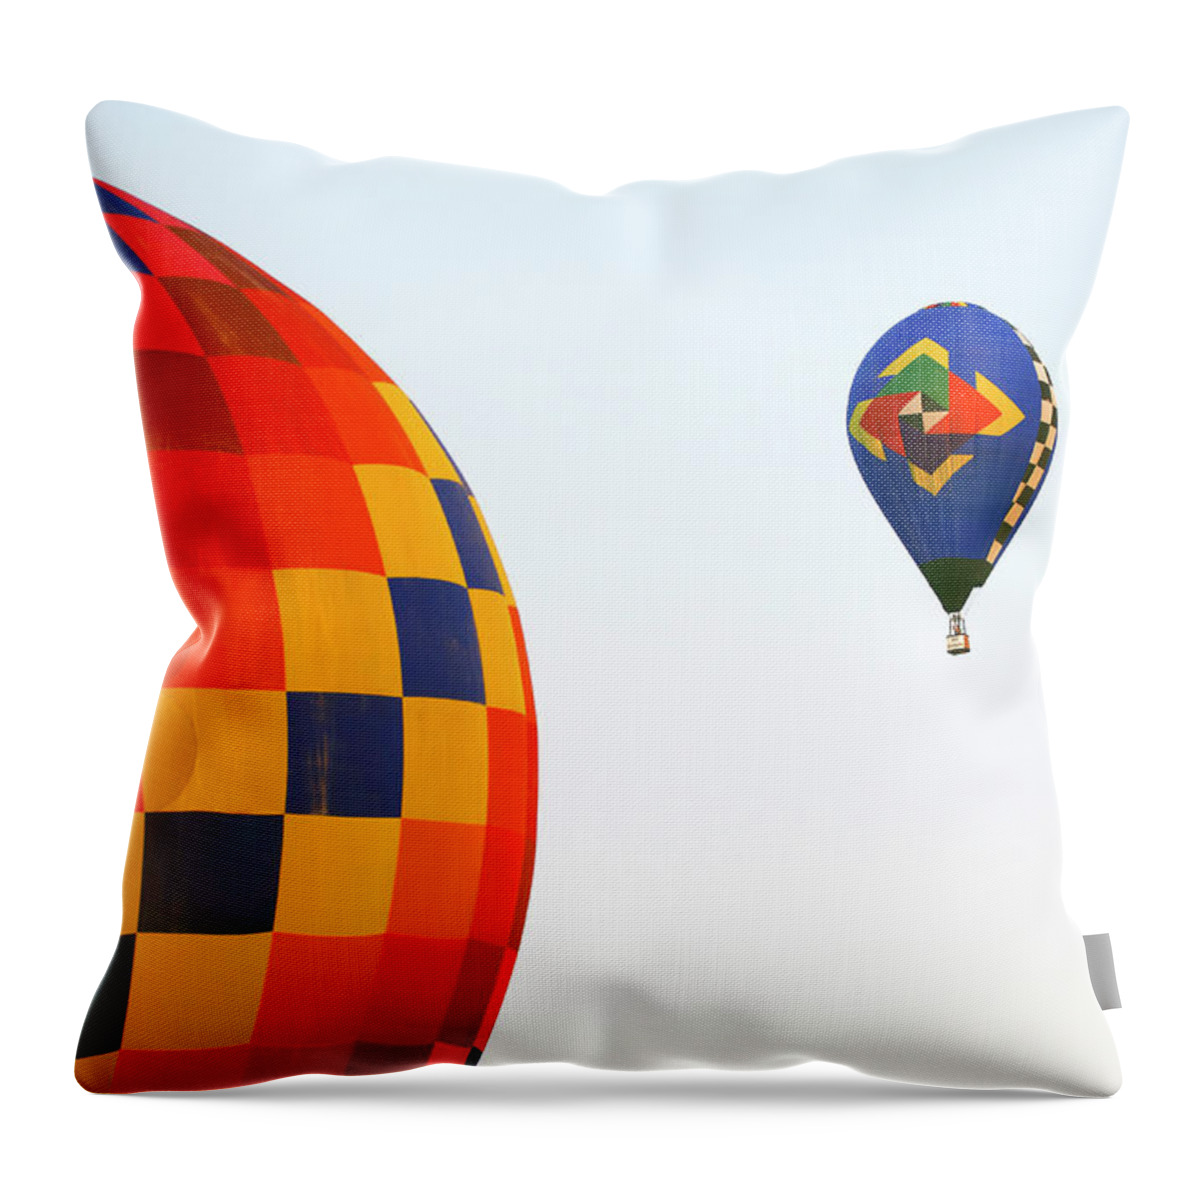 Balloons Throw Pillow featuring the photograph Hopscotch by Stephen Schwiesow